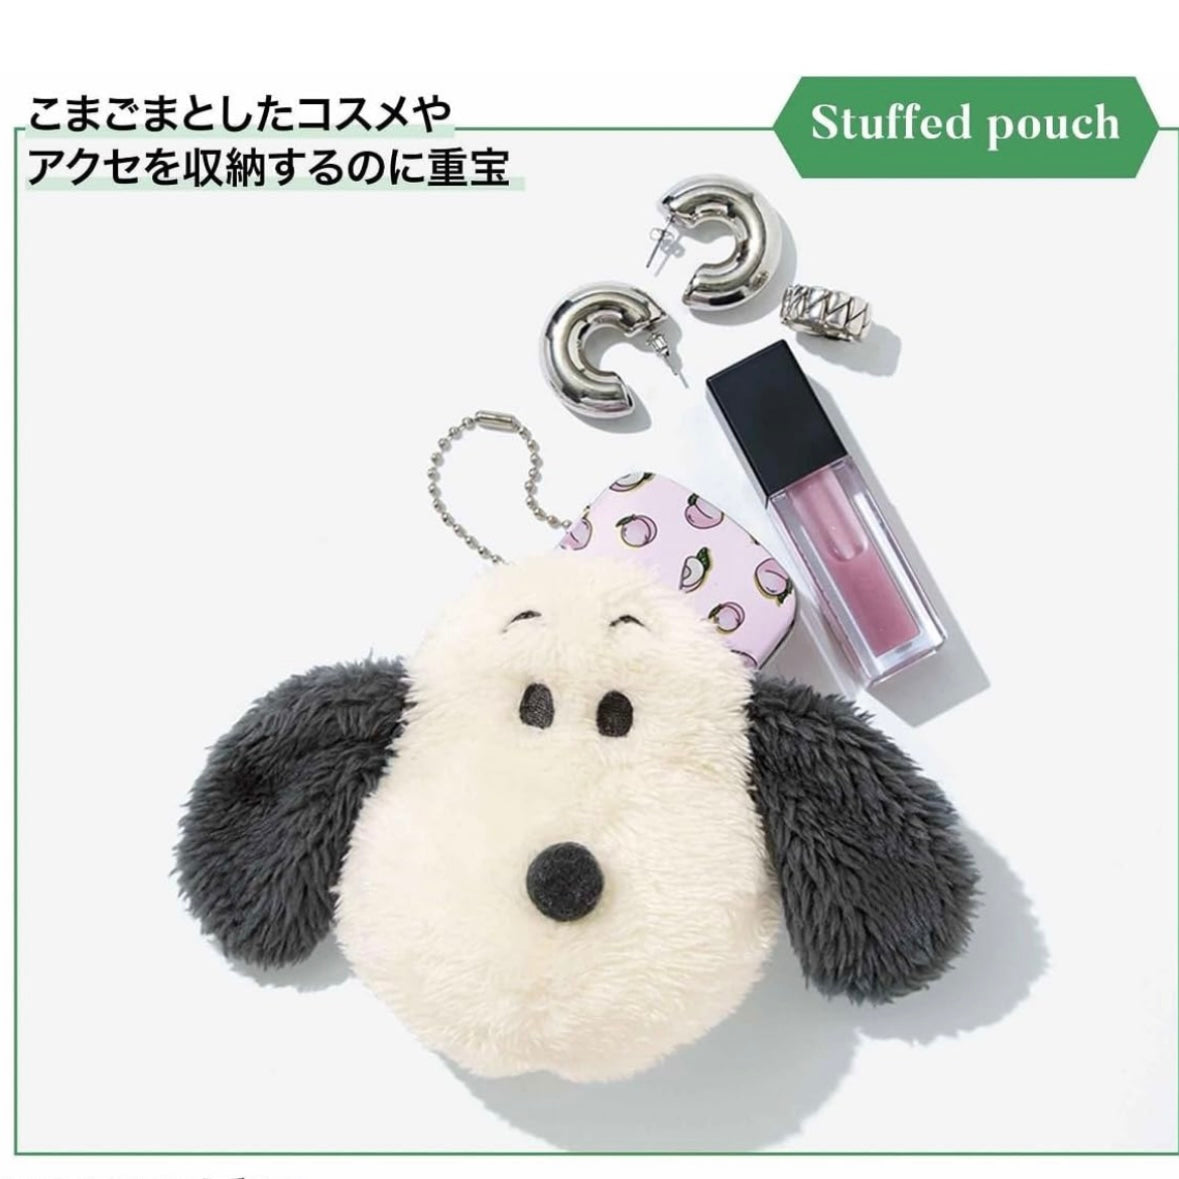 【Pre-Order｜July】Peanuts Snoopy Stuffed Pouch with Tote Bag 